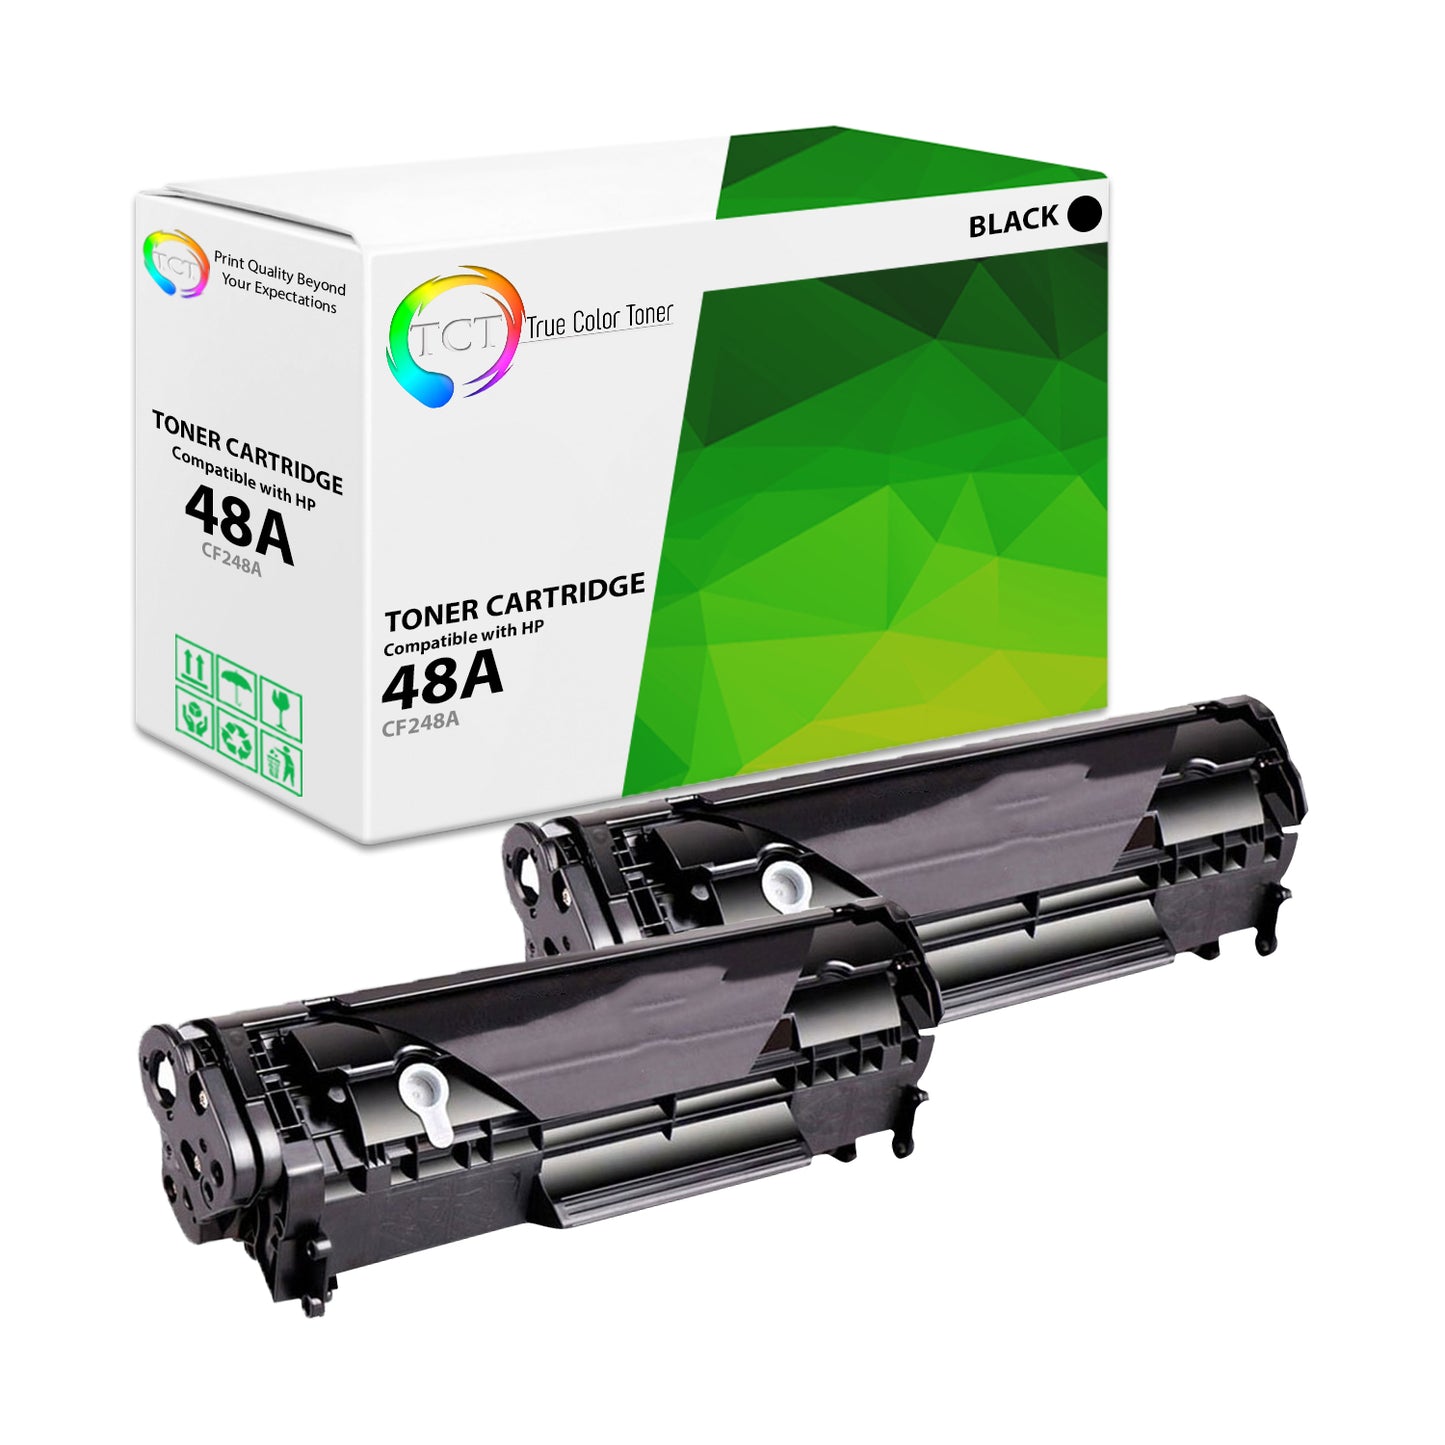 TCT Compatible Toner Cartridge Replacement for the HP 48A Series - 2 Pack Black